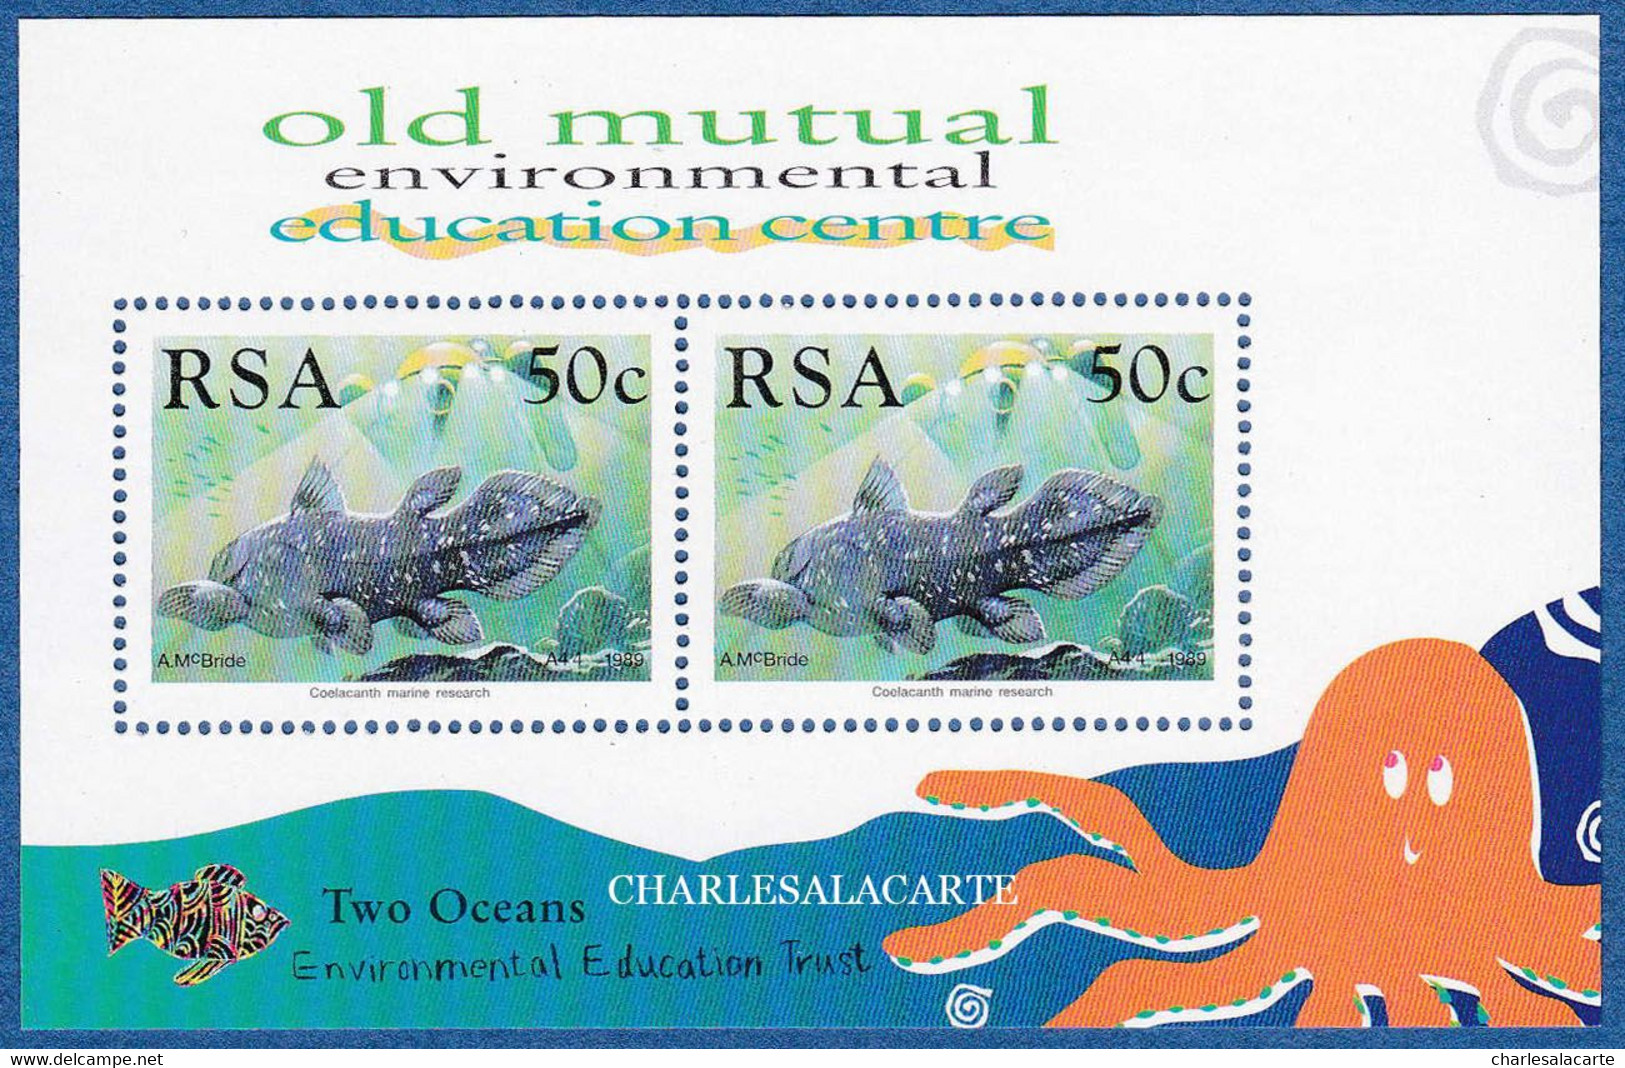 SOUTH AFRICA  1989  COELACANTH DISCOVERY M.S. OLD MUTUEL  S.G. 680 (2) M.S.  U.M. - Blocks & Kleinbögen